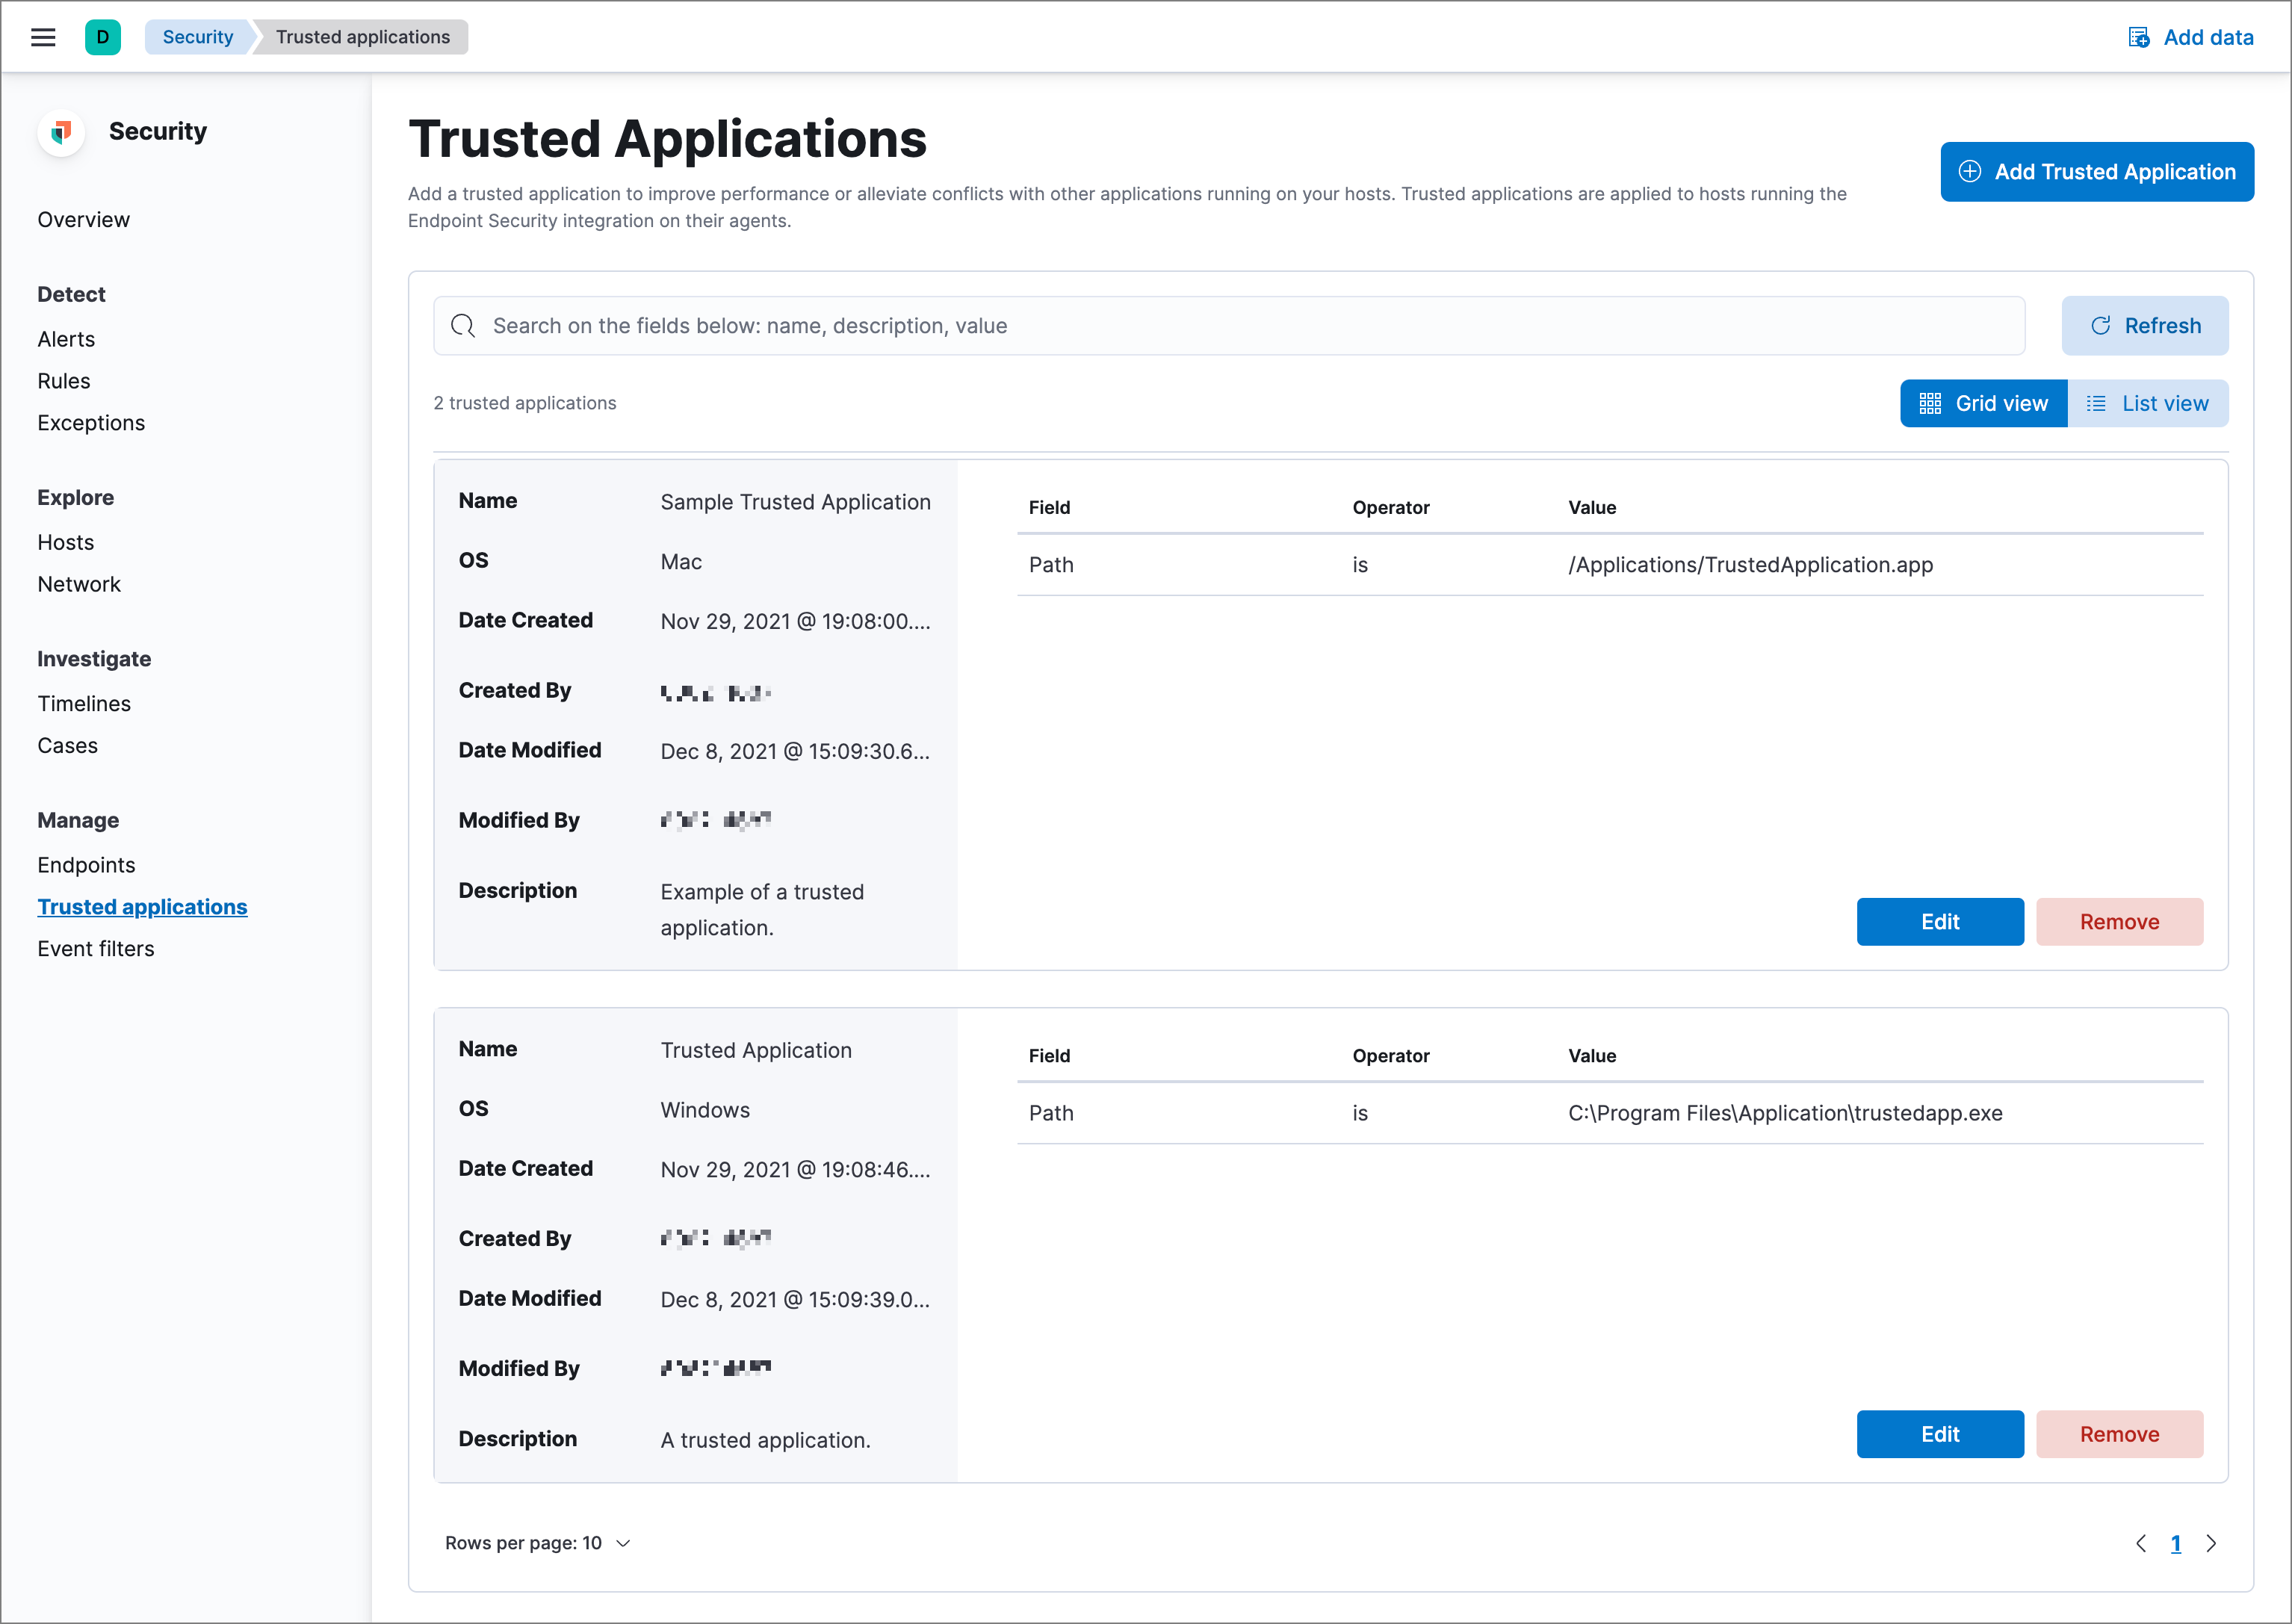 Shows the Trusted applications page